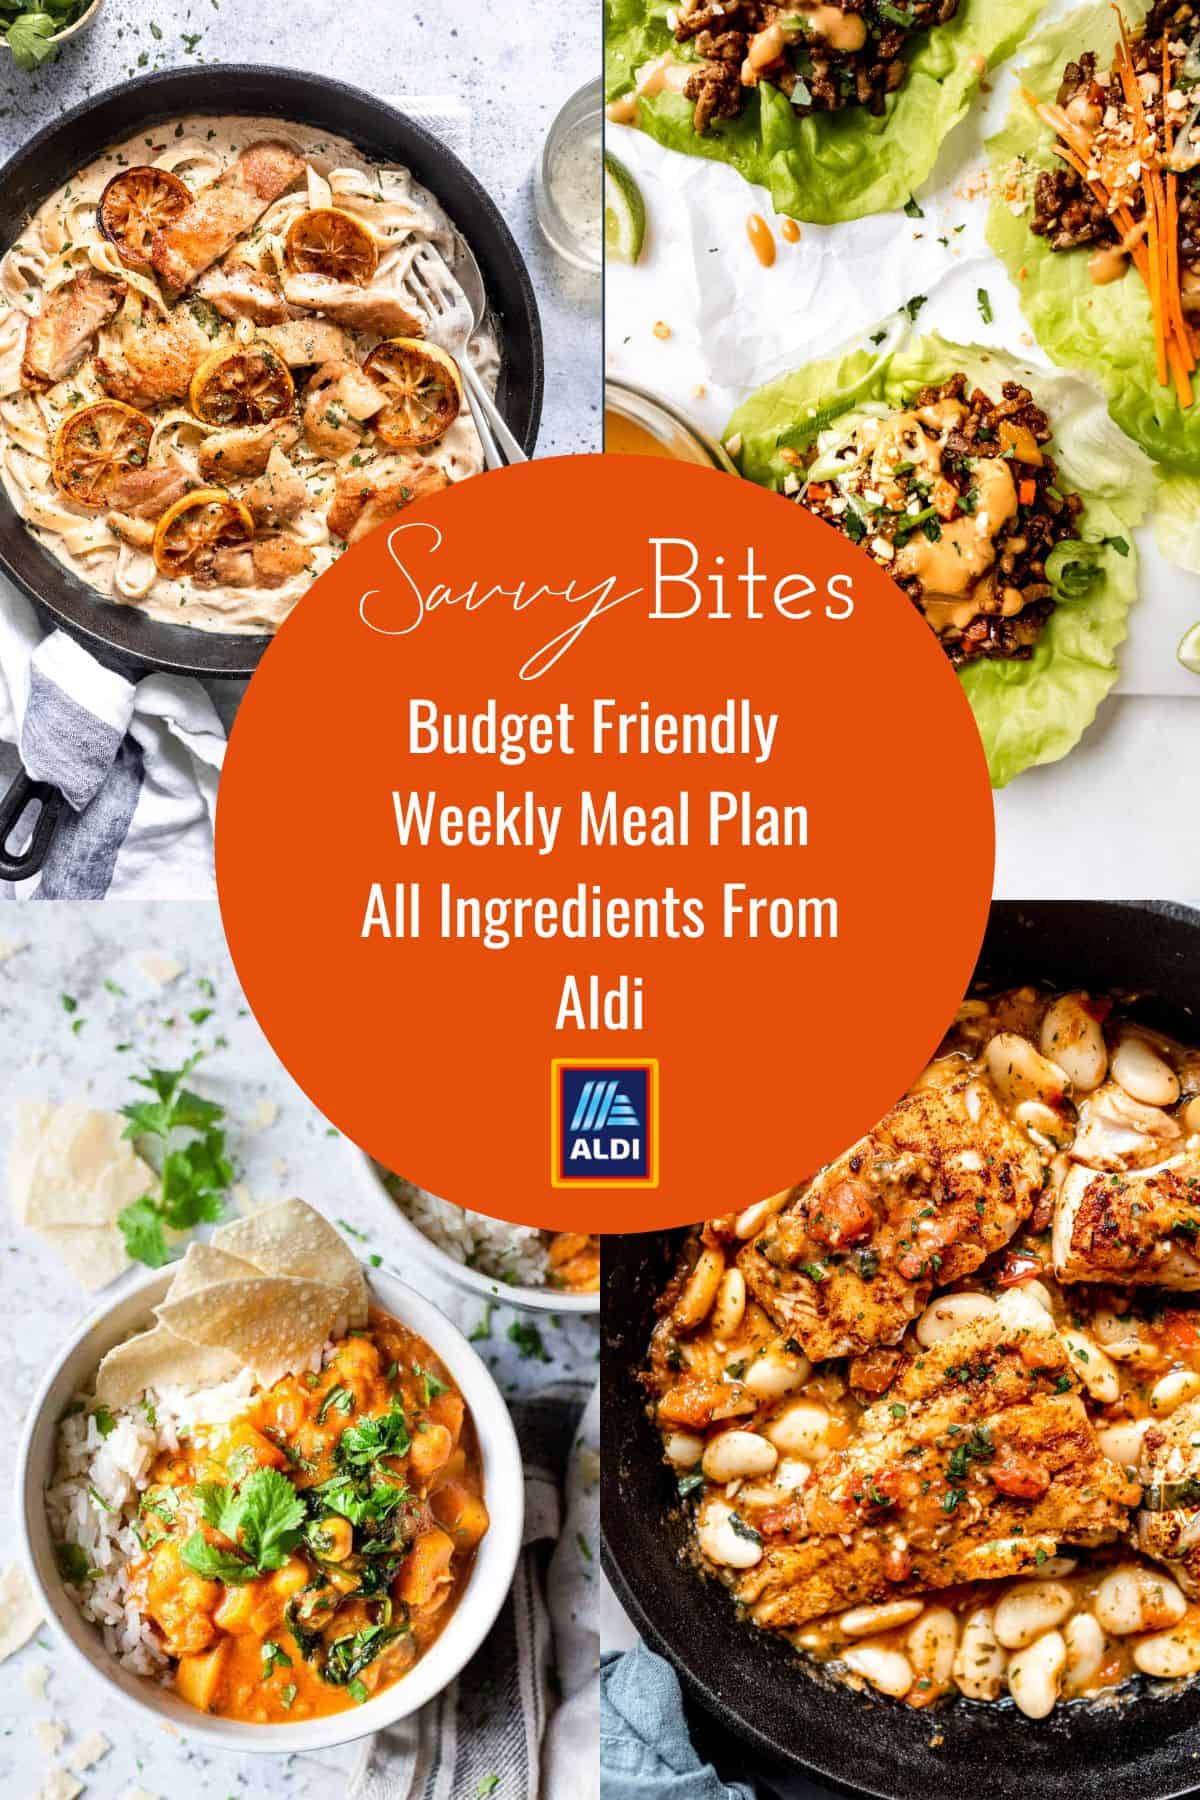 Weekly Aldi meal plans on a budget photo collage.